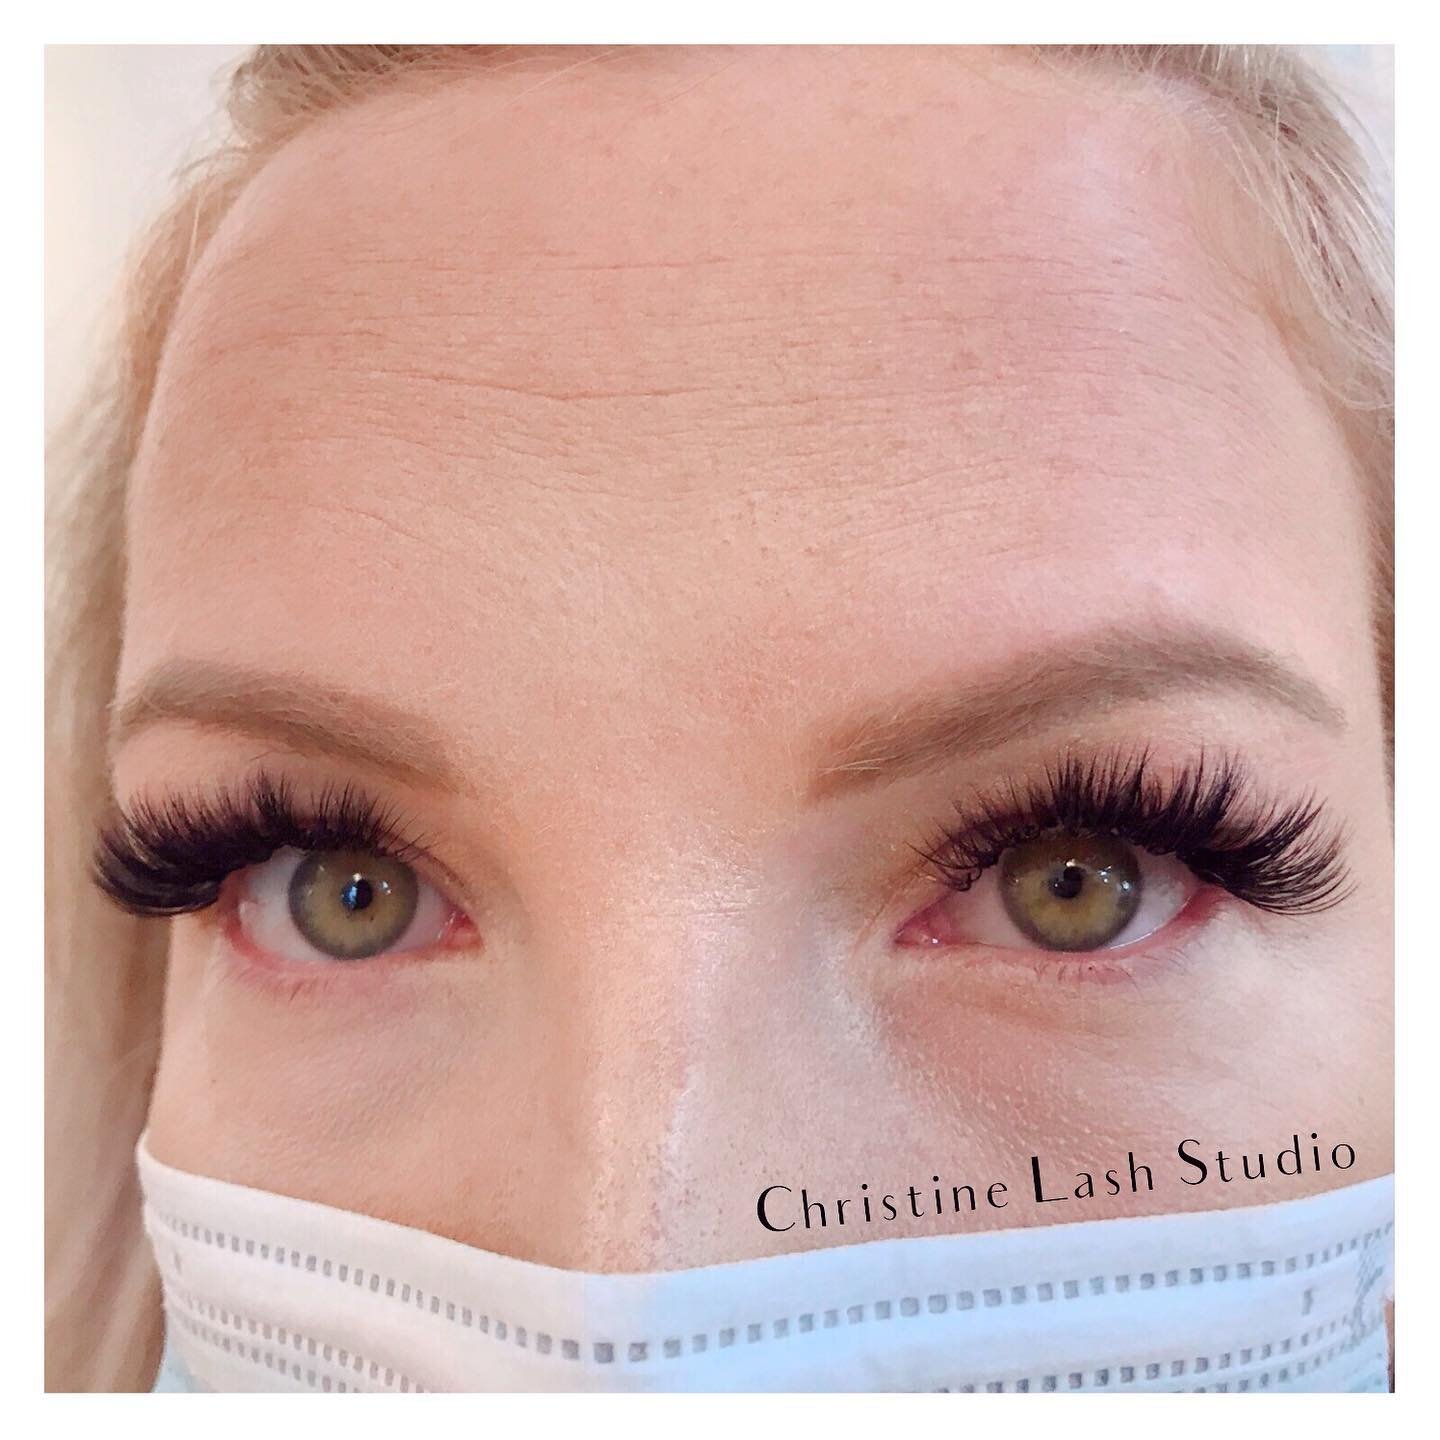 Bring on the volume with Russian Volume Lashes! Ideal for those looking for a dramatic, full lash look. Something to keep in mind with volume is that the density depends on your natural lash condition. If your lashes are naturally full, your extensio